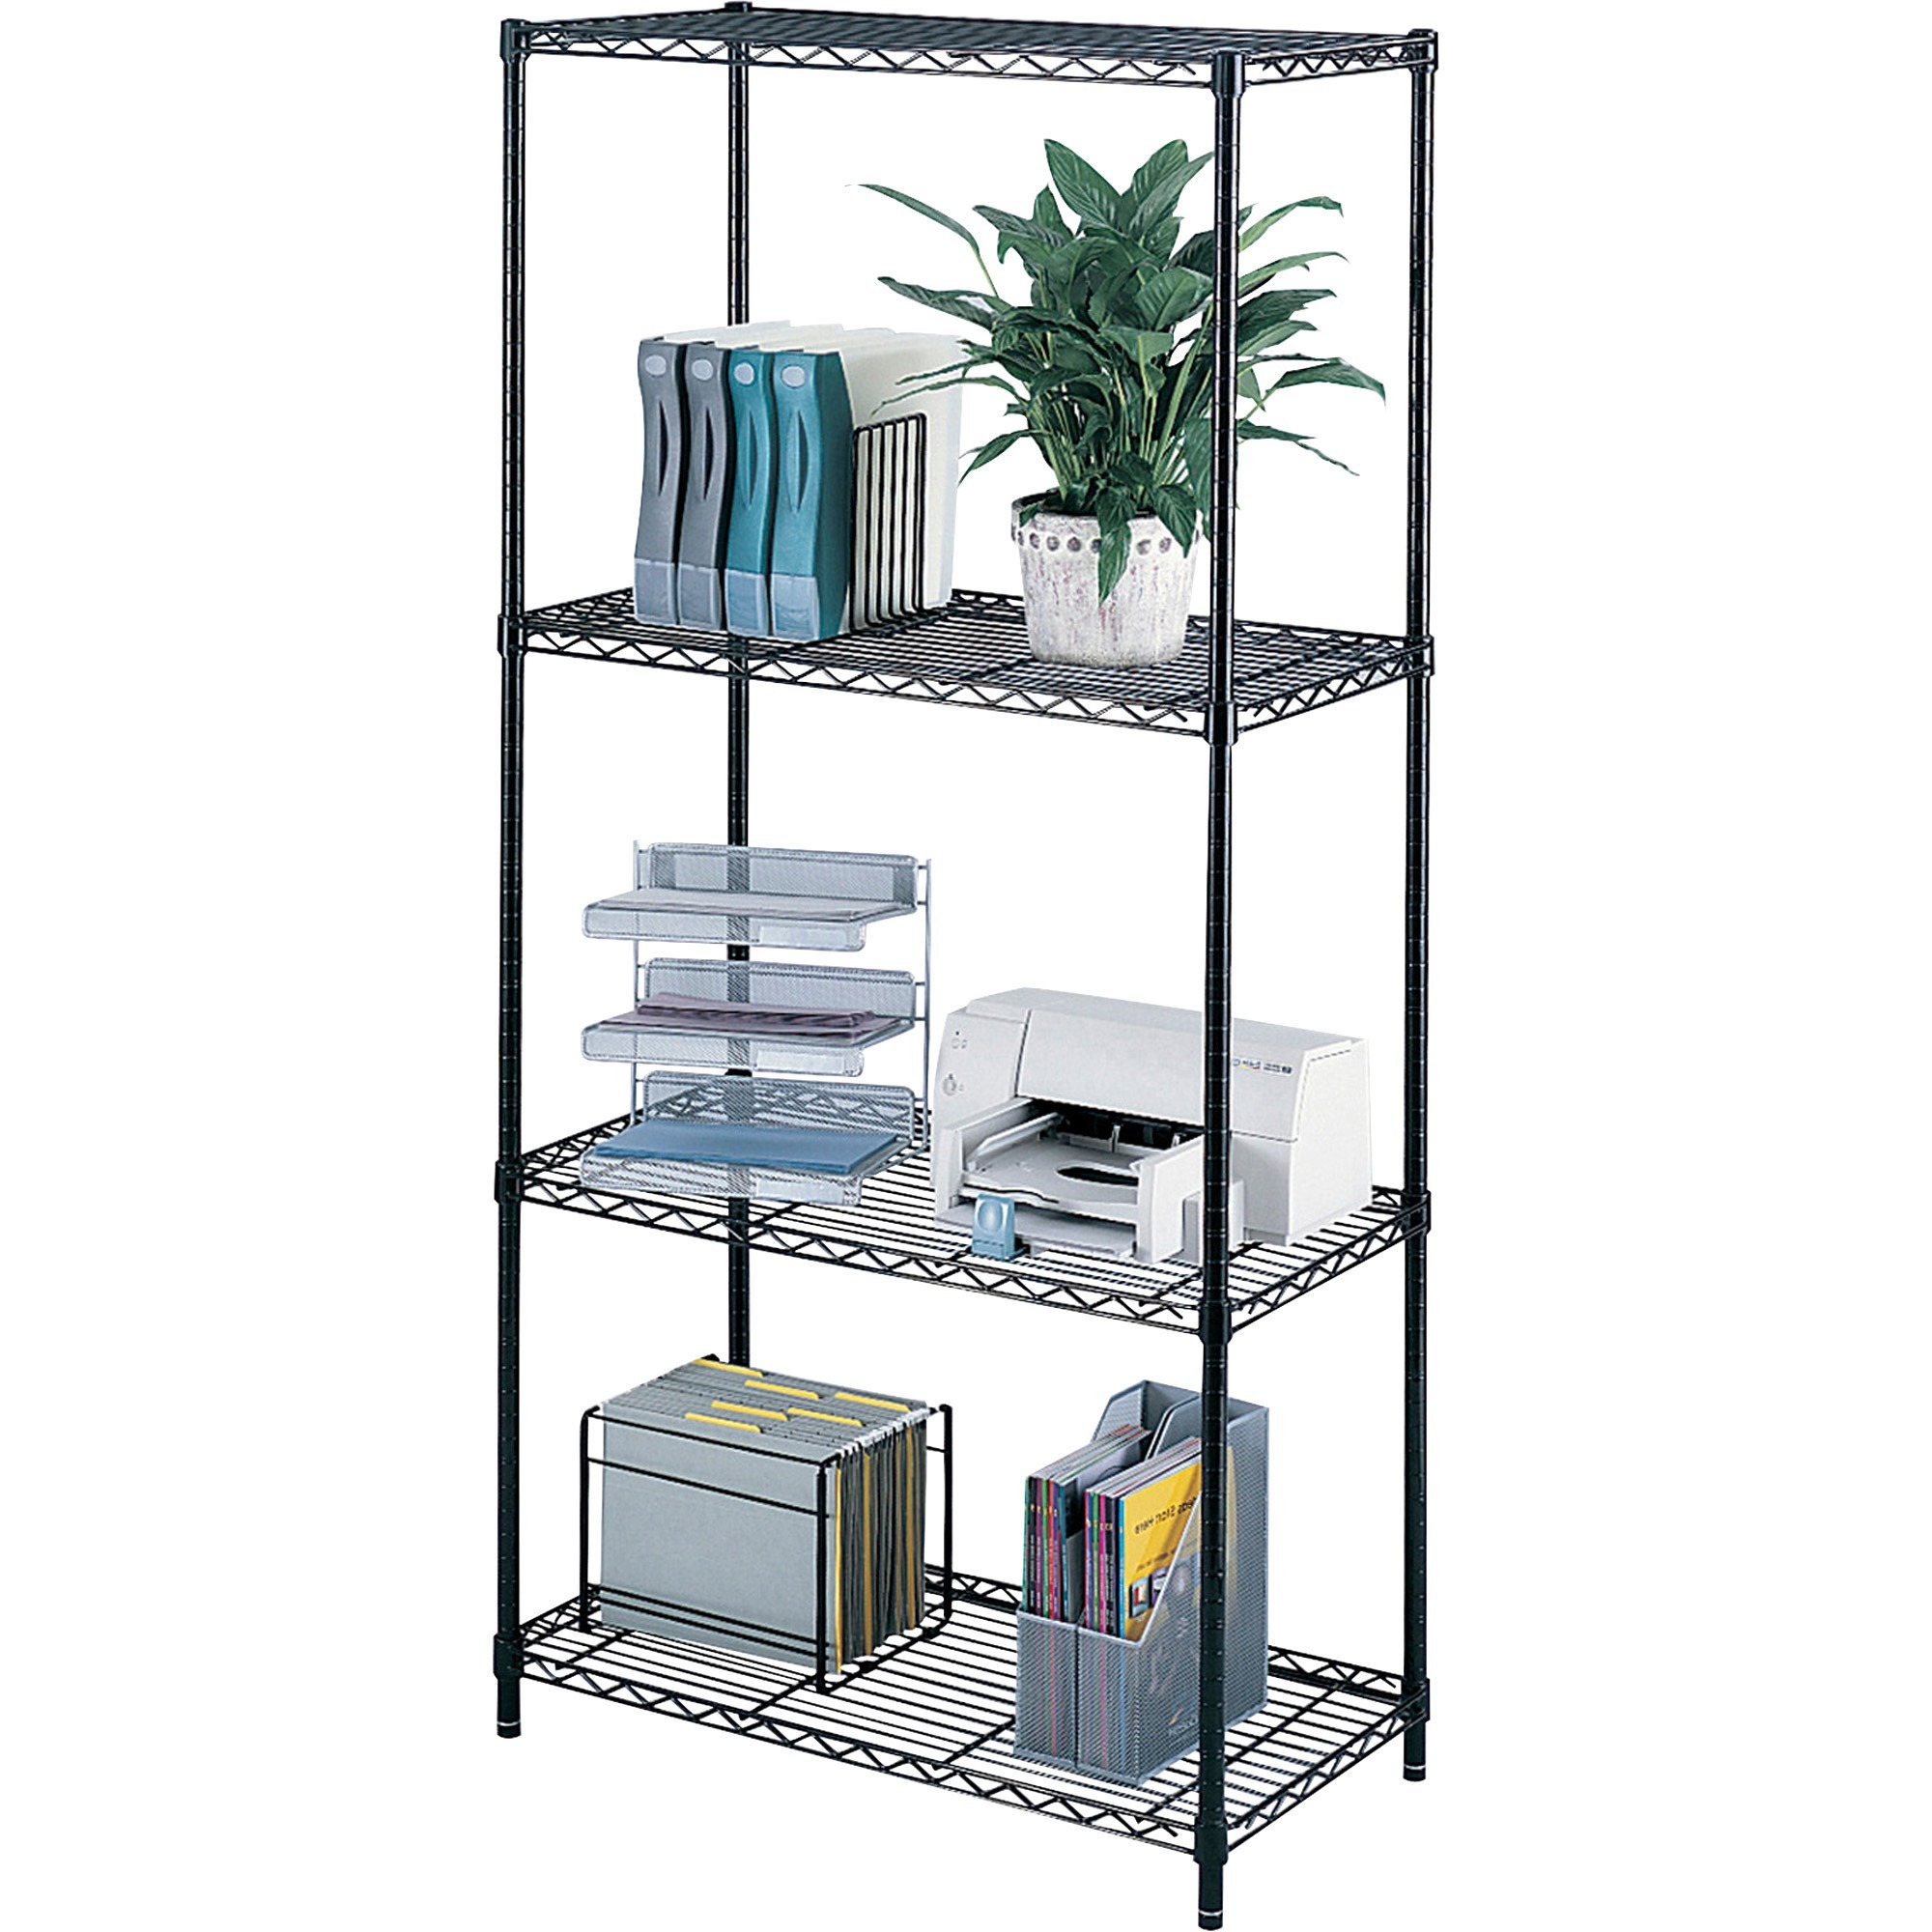 Safco Industrial Wire Shelving 36 X, Rust Proof Wire Shelving